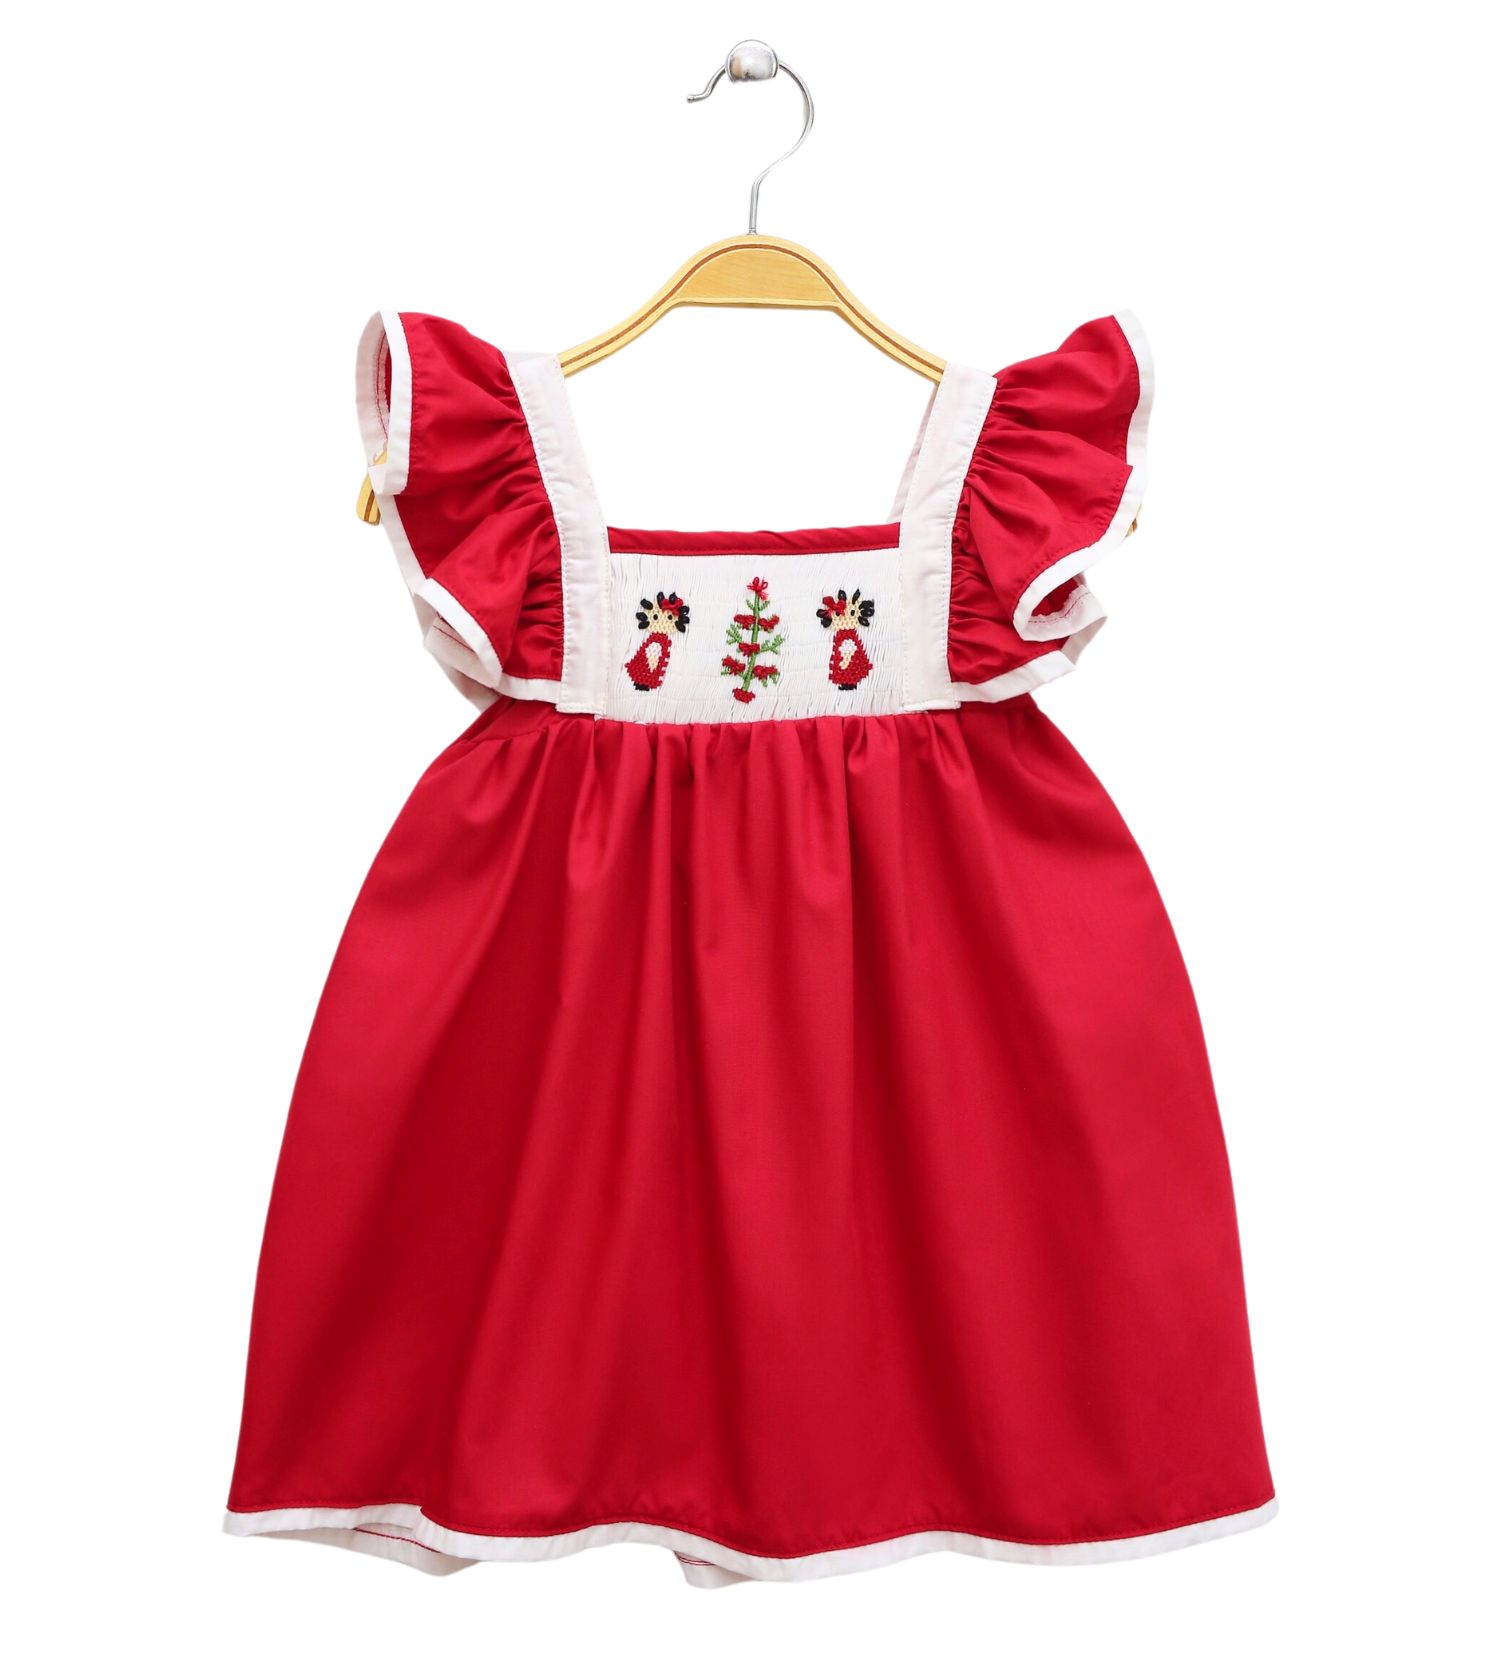 Red sundress for girls to wear on Tet holiday